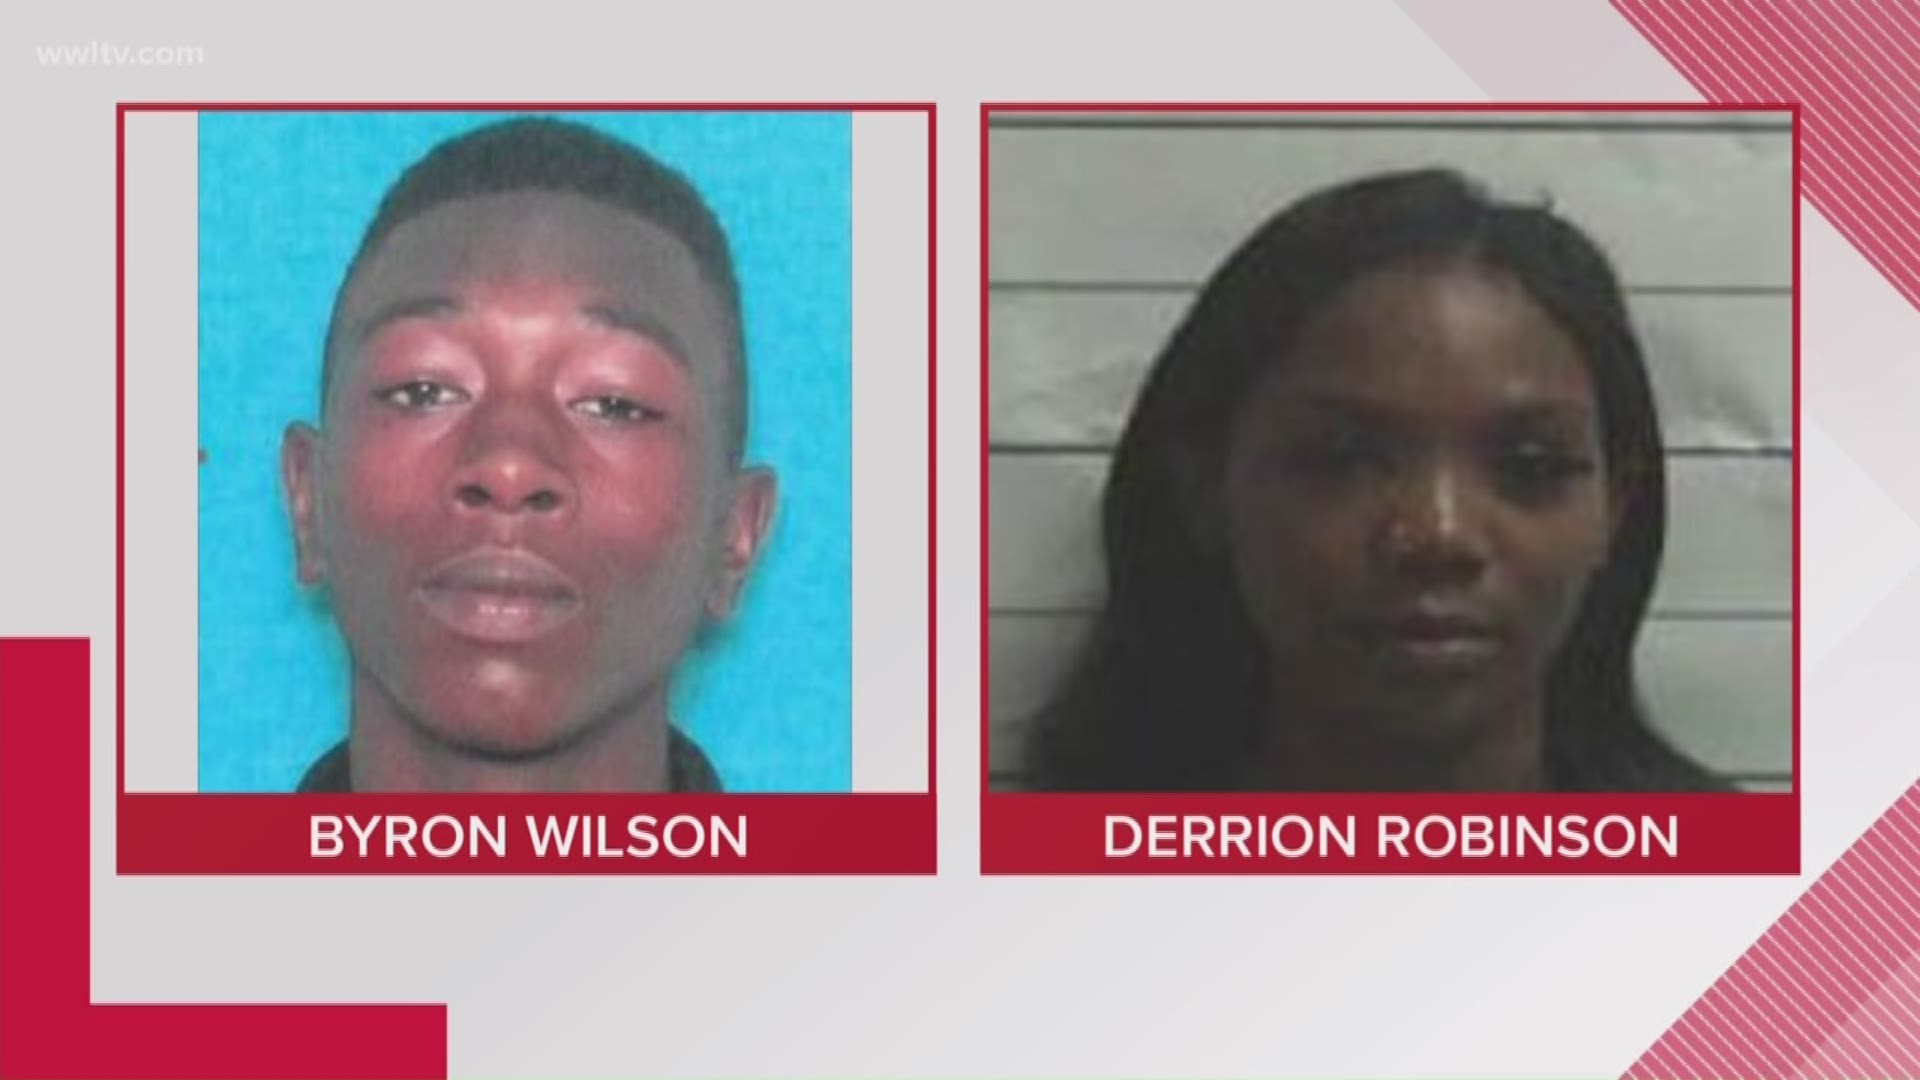 Byron Wilson, 20, and Derrion Robinson, 20, were wanted for the shooting on September 23. That shooting was captured on video and showed a group casually walking around before words were exchanged and a shot was fired.